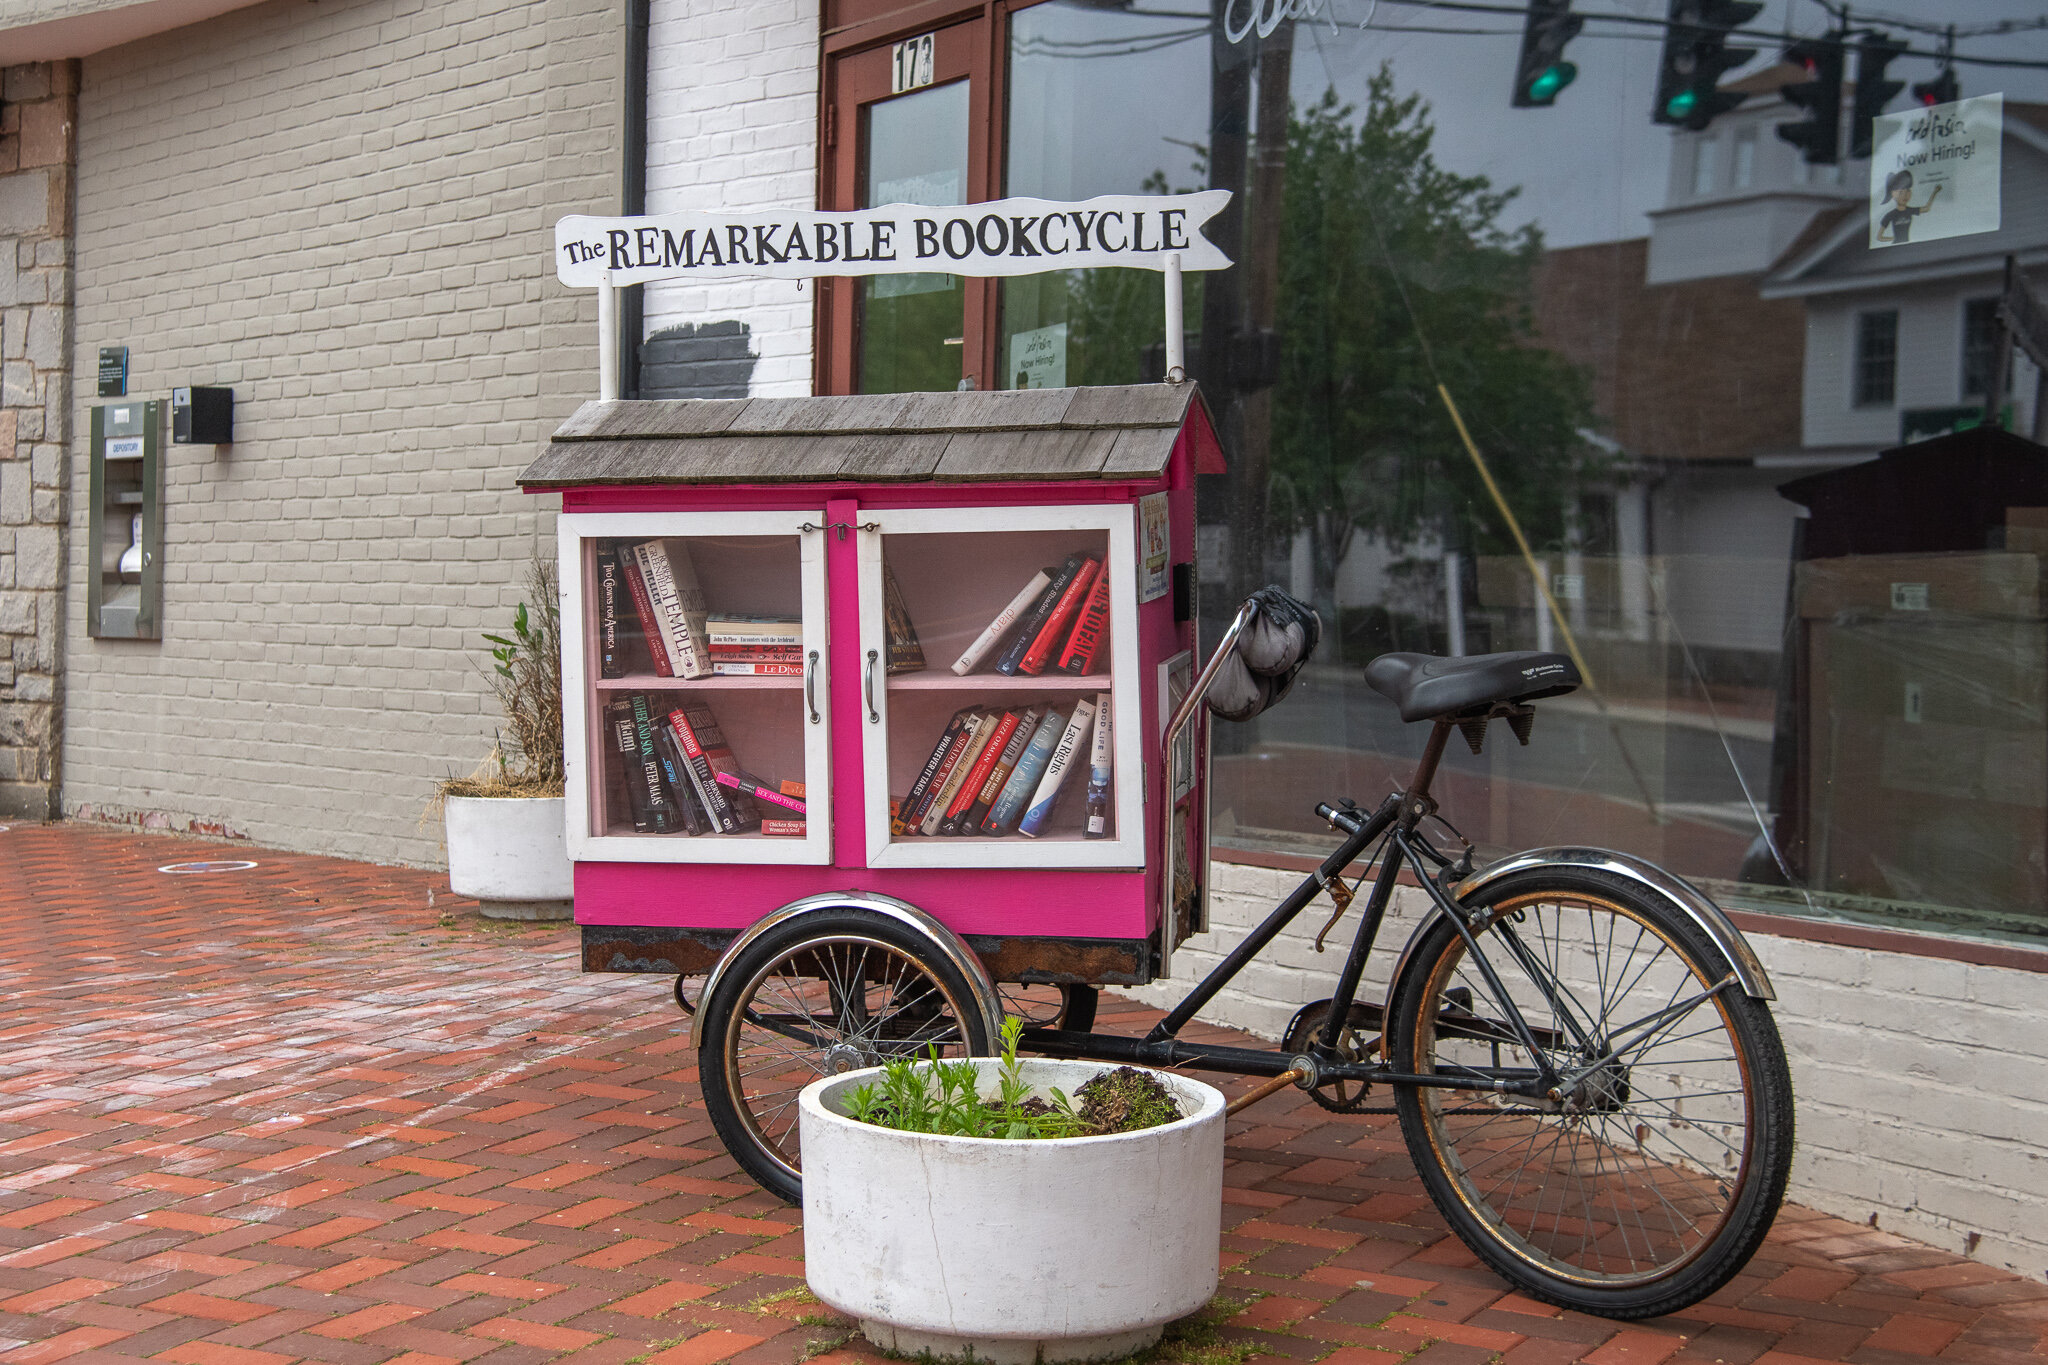 Westport’s famous pink Remarkable Bookcycle is now stationed on the sidewalk in front of 173 Main Street, the future home of Cold Fusion Gelato. The mobile free library offers free novels and children’s books to anyone who stops by, curated by a team of volunteer Remarkable Librarians. The bicycle was painted and retrofitted by Ryan Peterson with the lead of novelist Jane Green. The name and color come from the famous Remarkable Bookshop, which sat just up from the bike’s current spot before its closure.